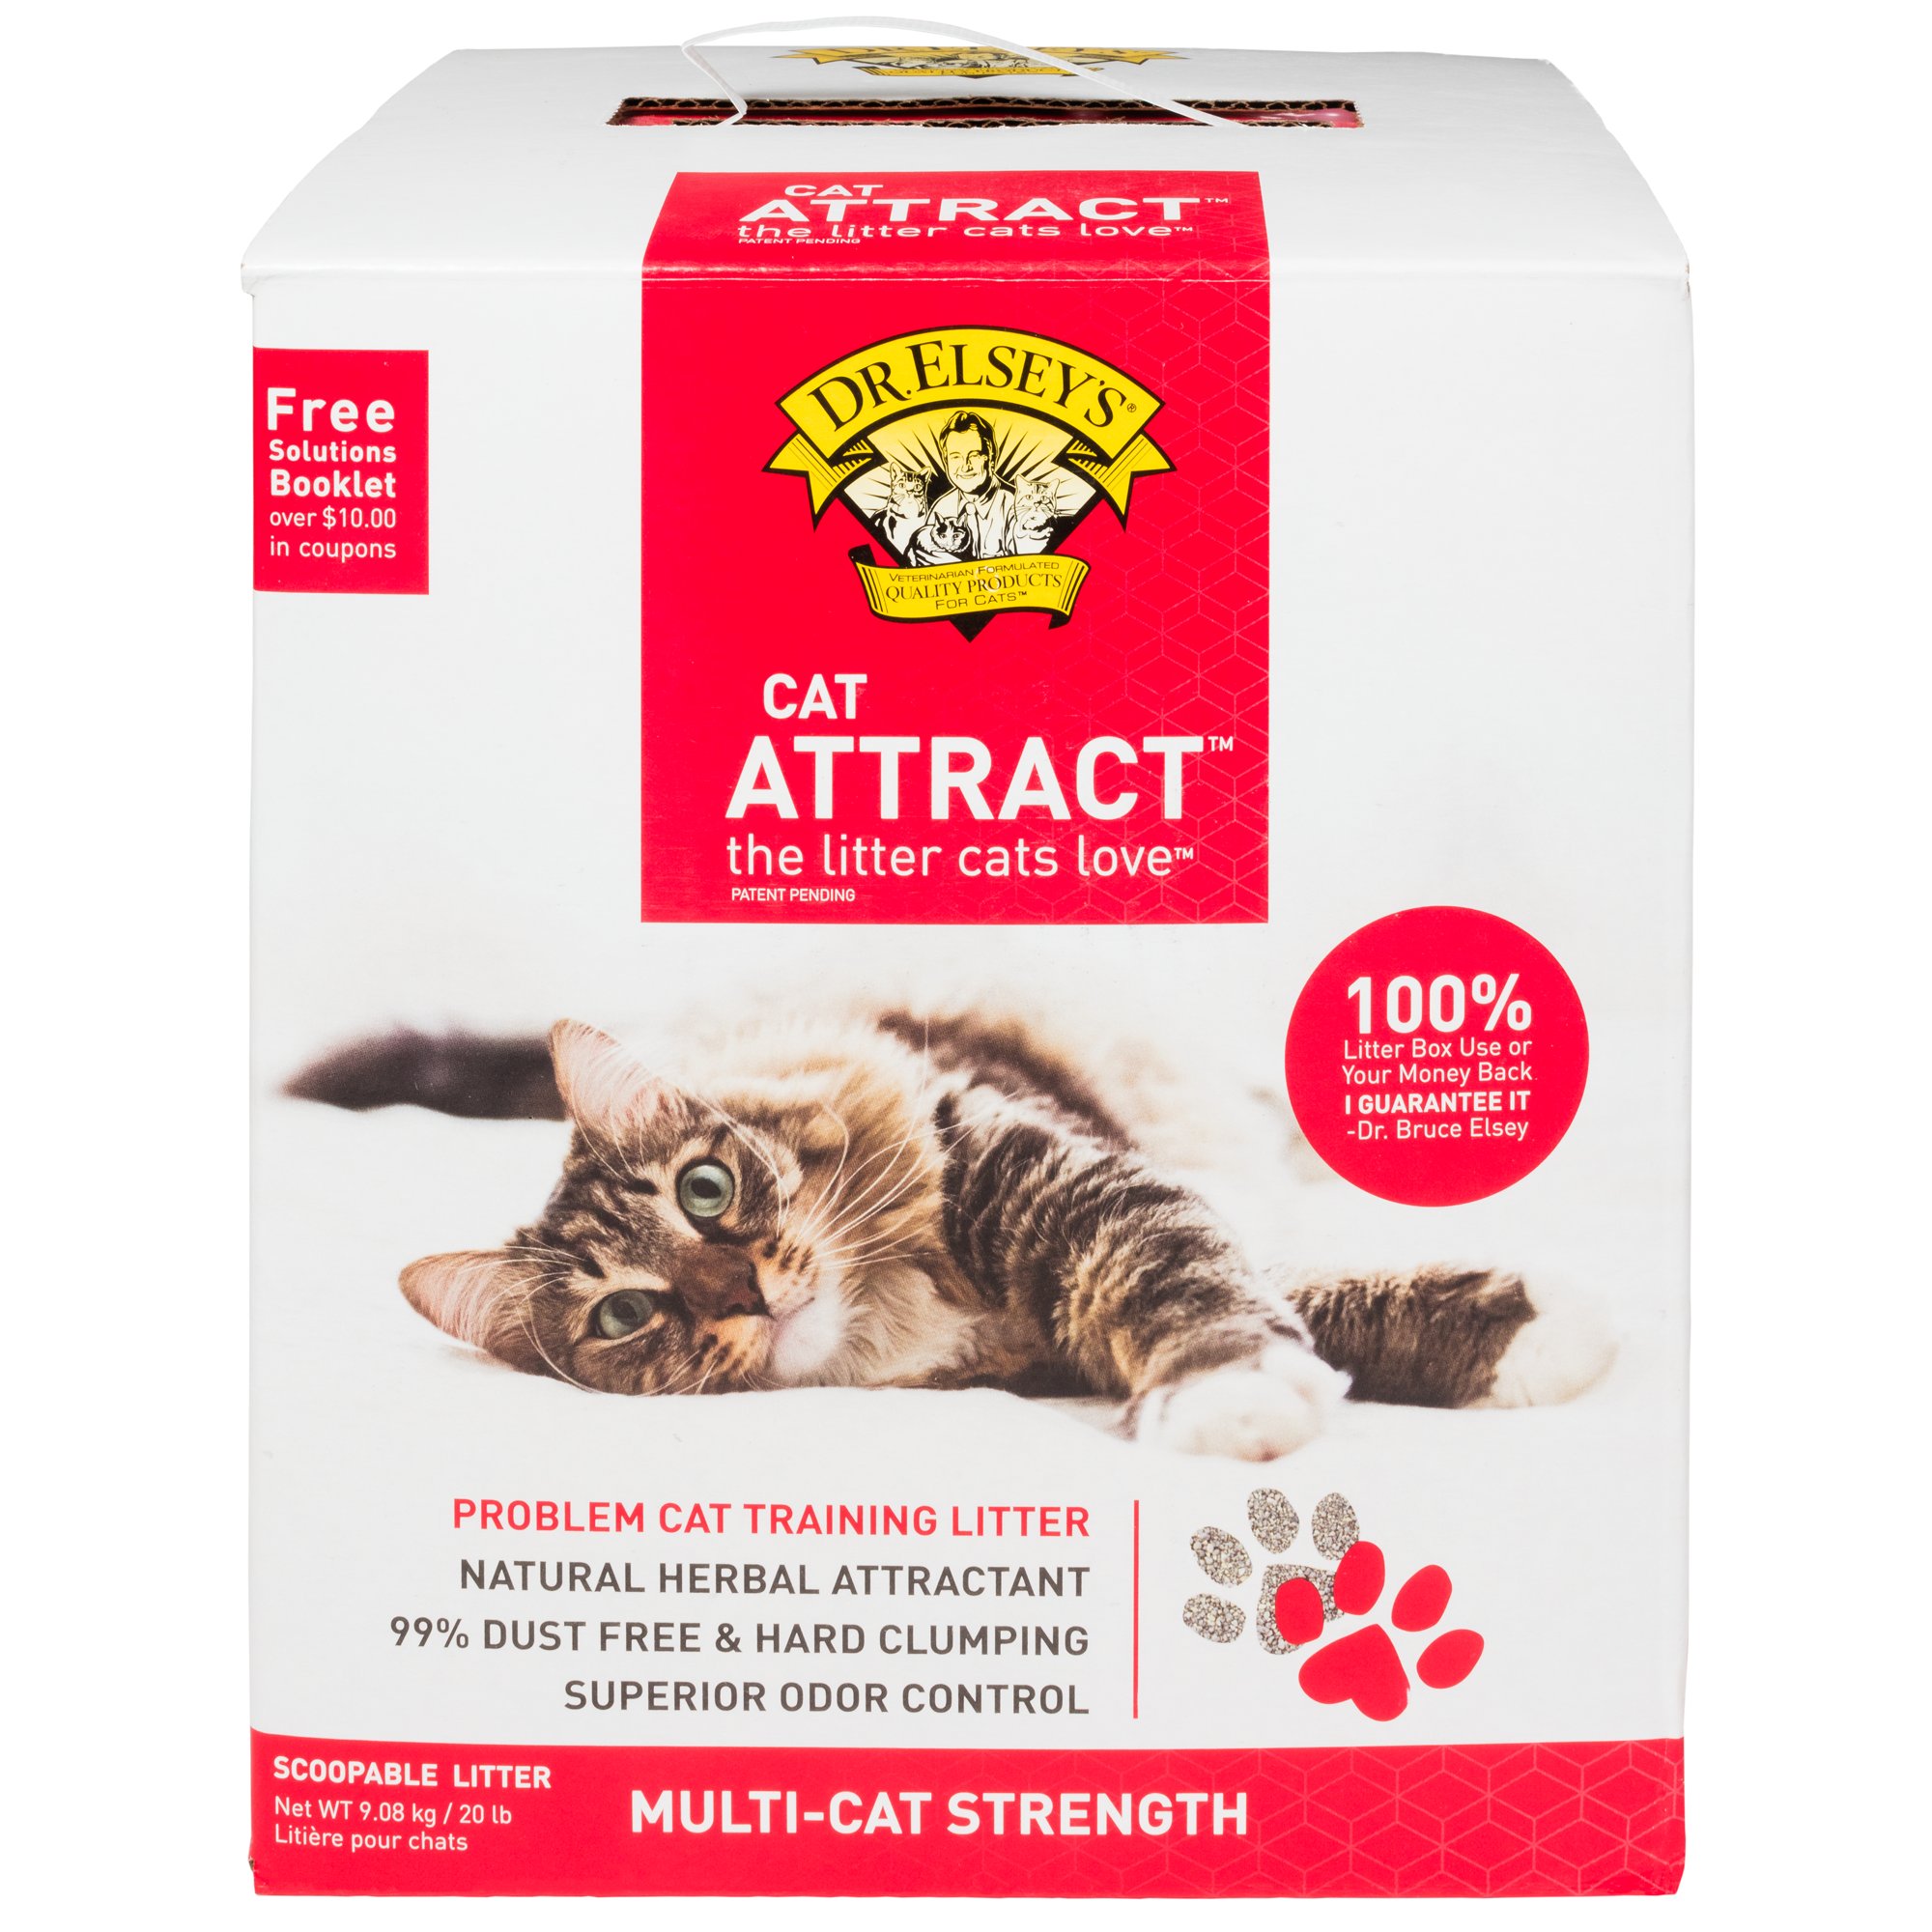 Precious Cat Dr. Elsey's Cat Attract Scoopable Cat Litter Petco